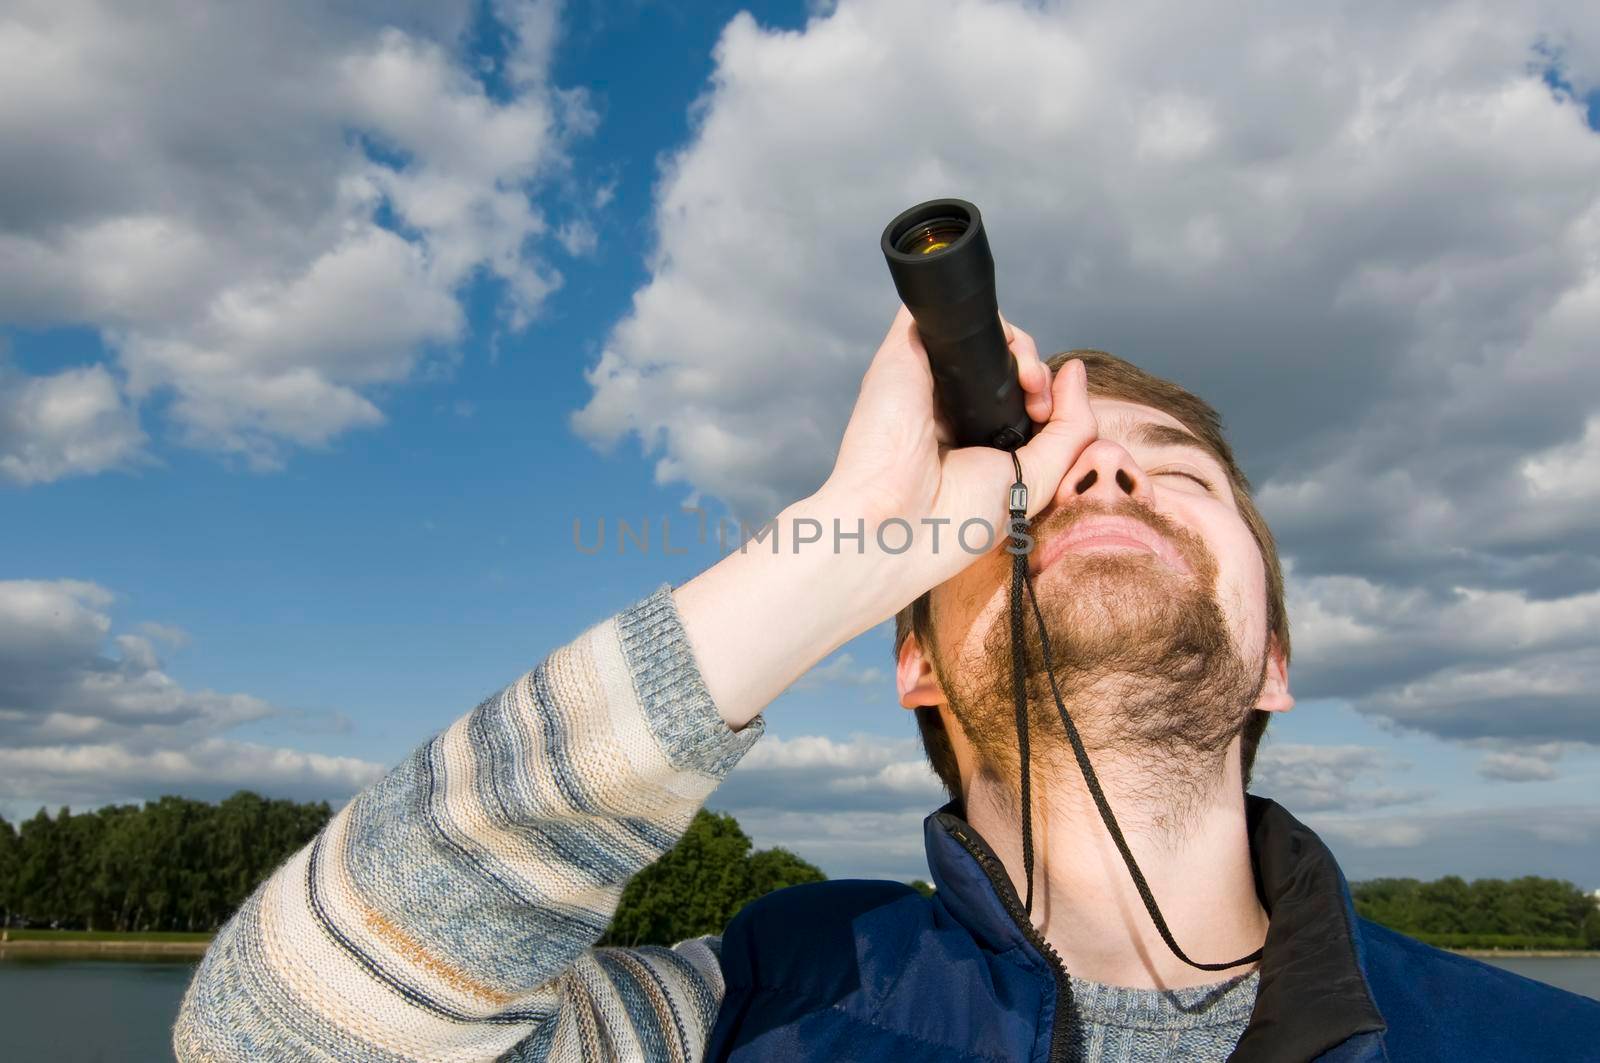 Young man hangs out in a park looking up with his spyglass.